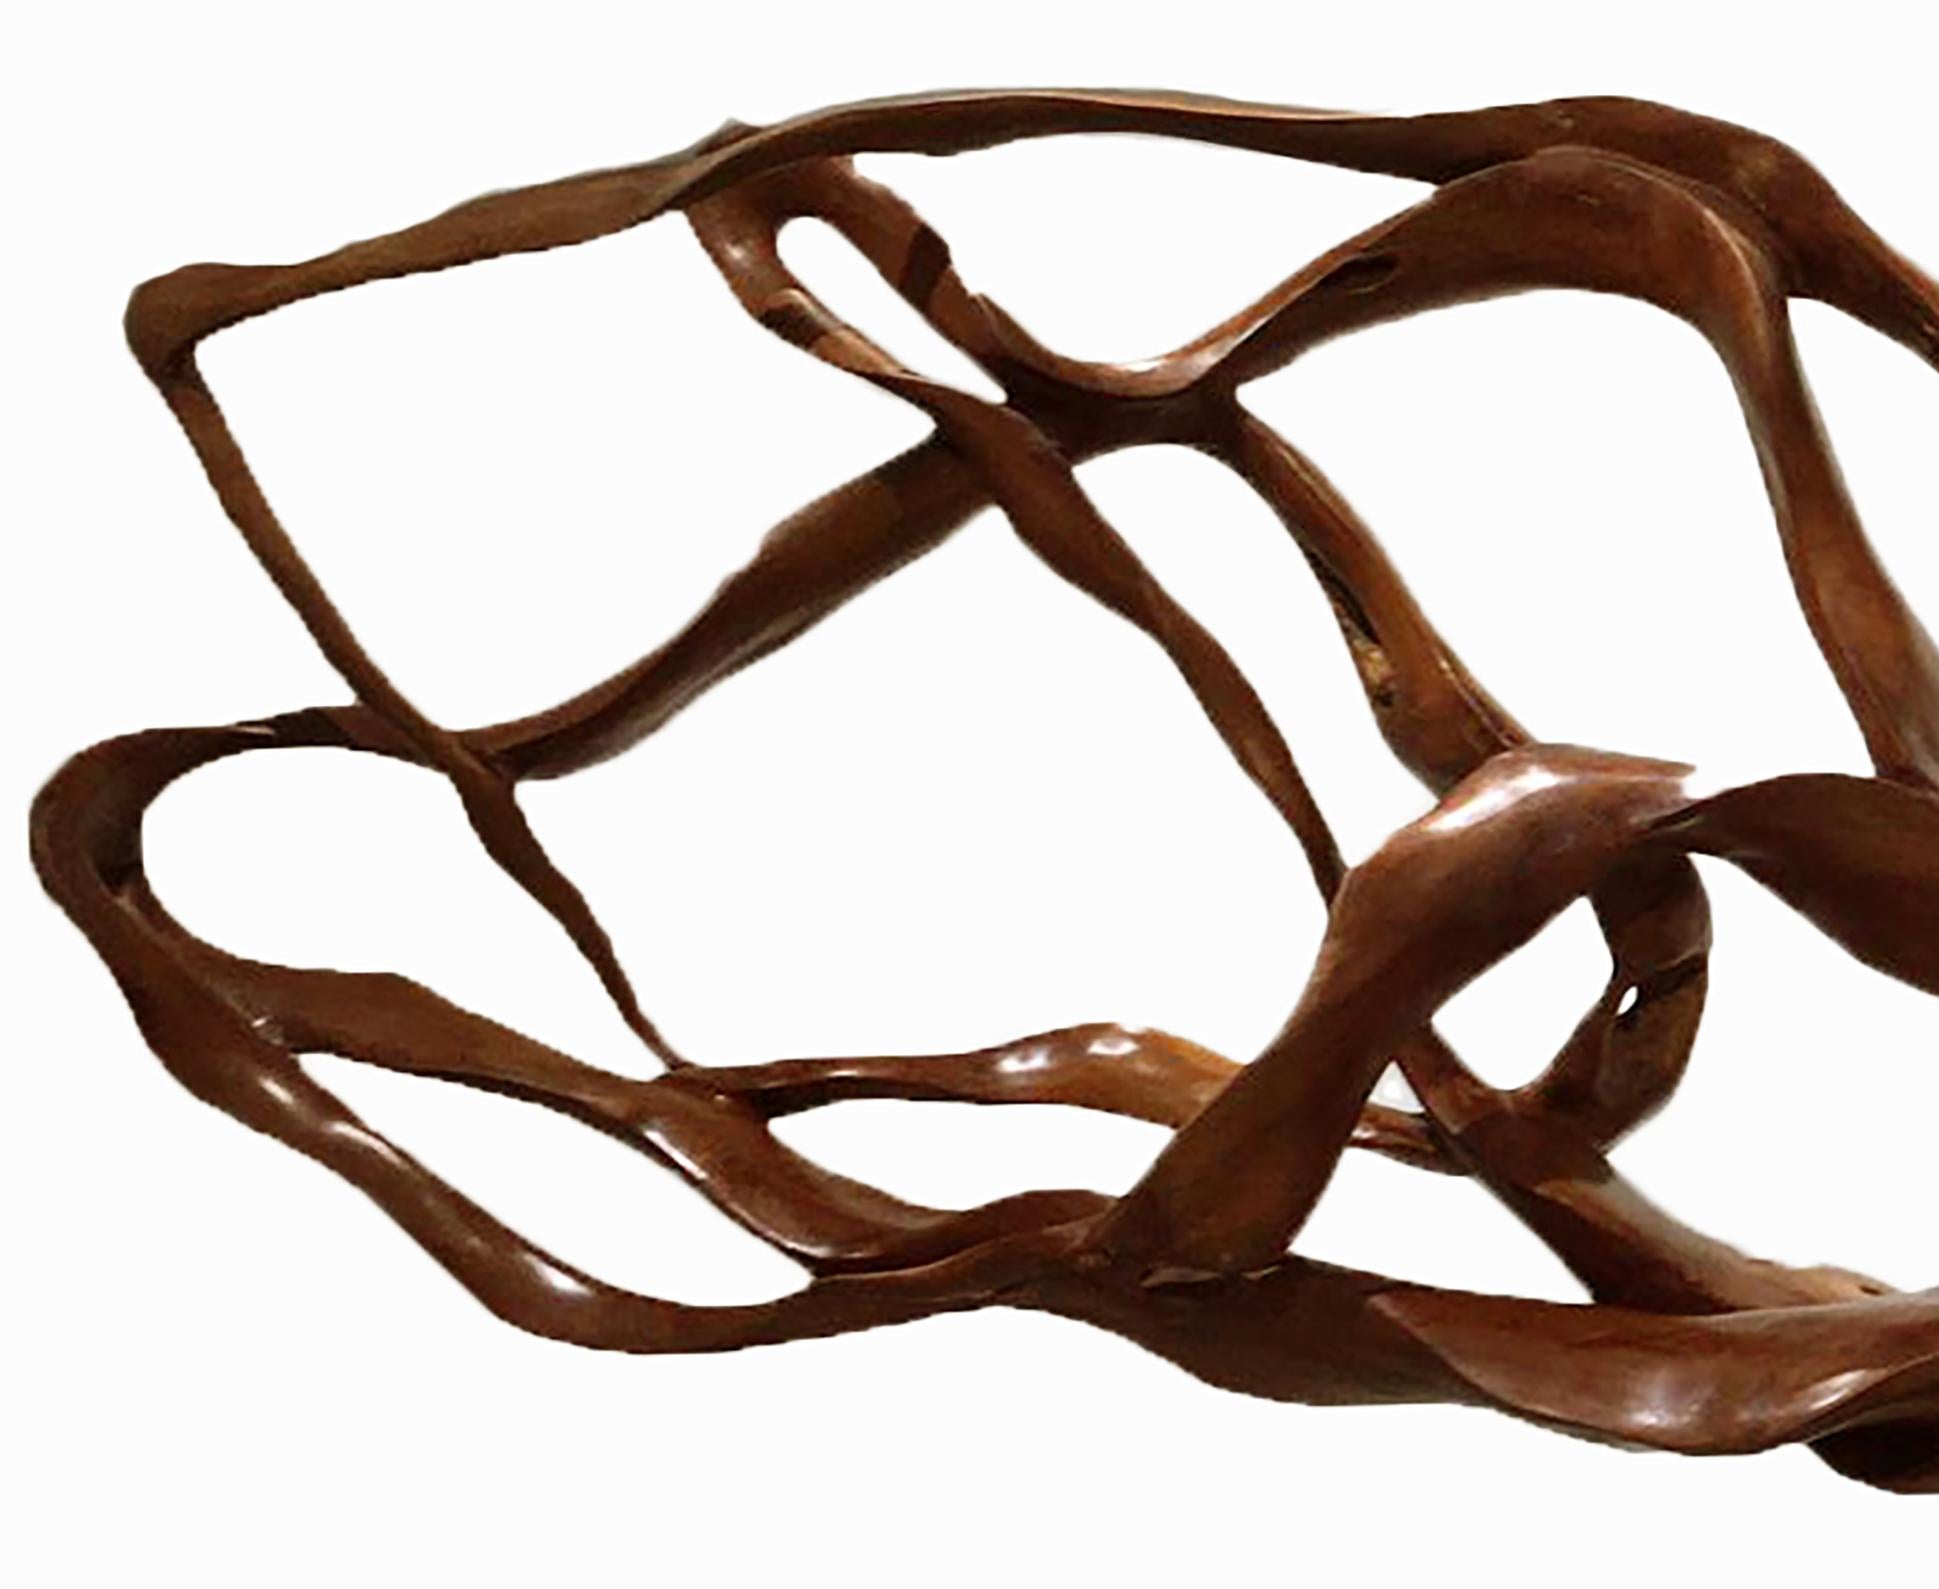 Radiance - 21st Century, Contemporary, Abstract Sculpture, Lychee Wood, Roots 3